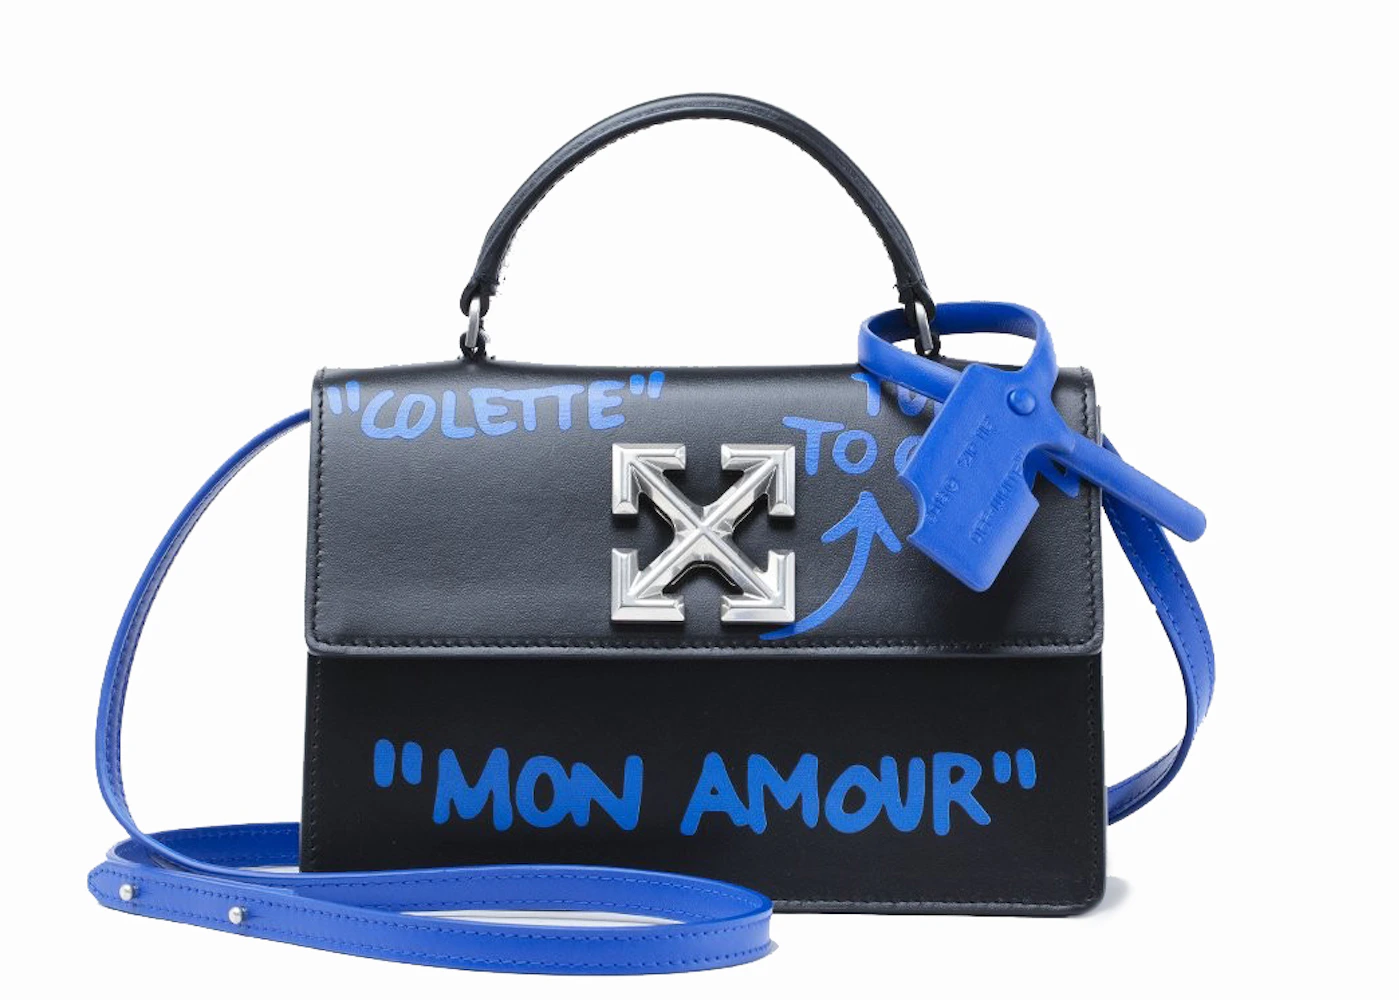 OFF-WHITE x colette 1.4 Jitney Bag Mon Amour Black Blue in Leather